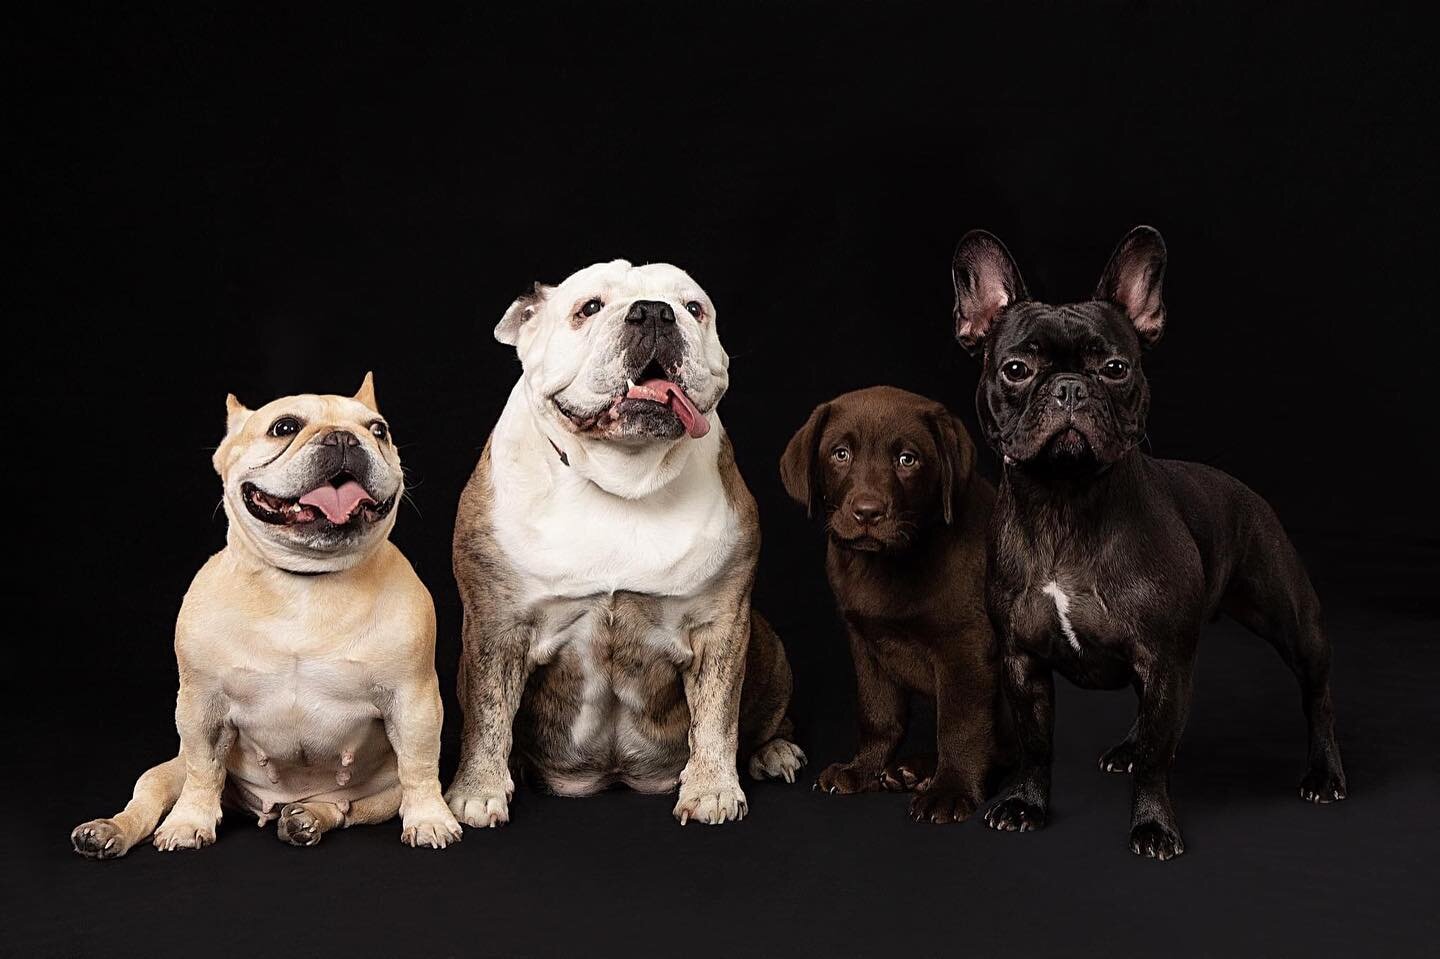 This was one amazing and fore filling session&hellip; loved the challenge of 4 puppies and the light to dark too #puppy #rescuedog #dogmom #dogsofinstagram